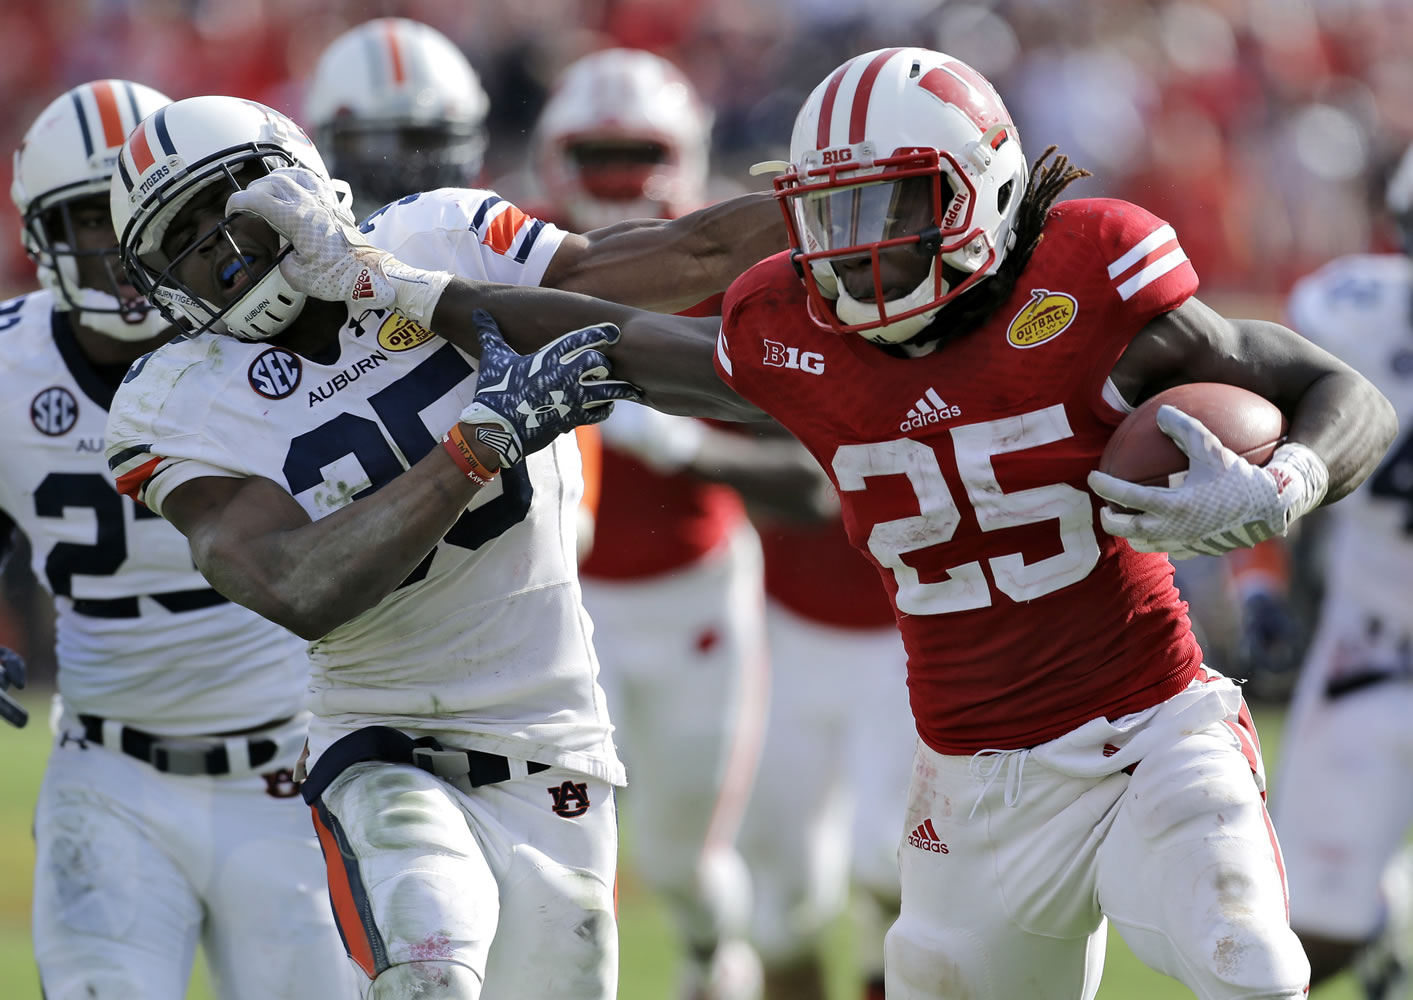 Wisconsin running back Melvin Gordon (25) stiff arms Auburn defensive back Jermaine Whitehead (35) on a 53-yard touchdown run during the third quarter of the Outback Bowl on Thursday.